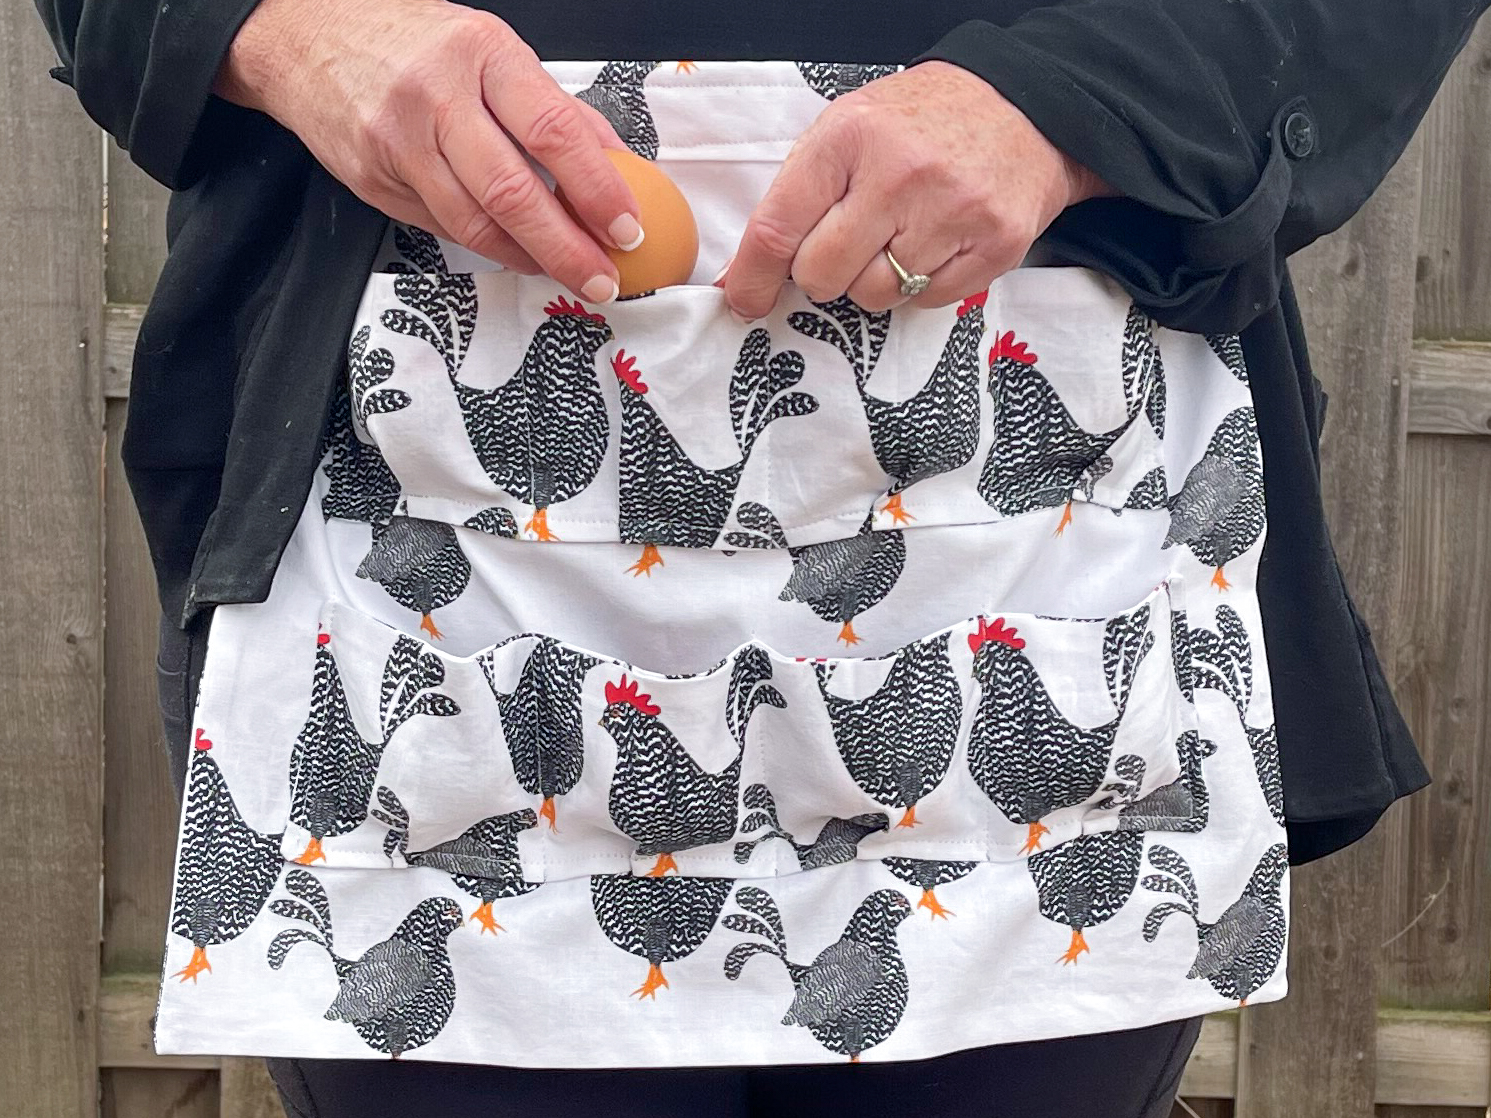 How to Make an Egg Apron